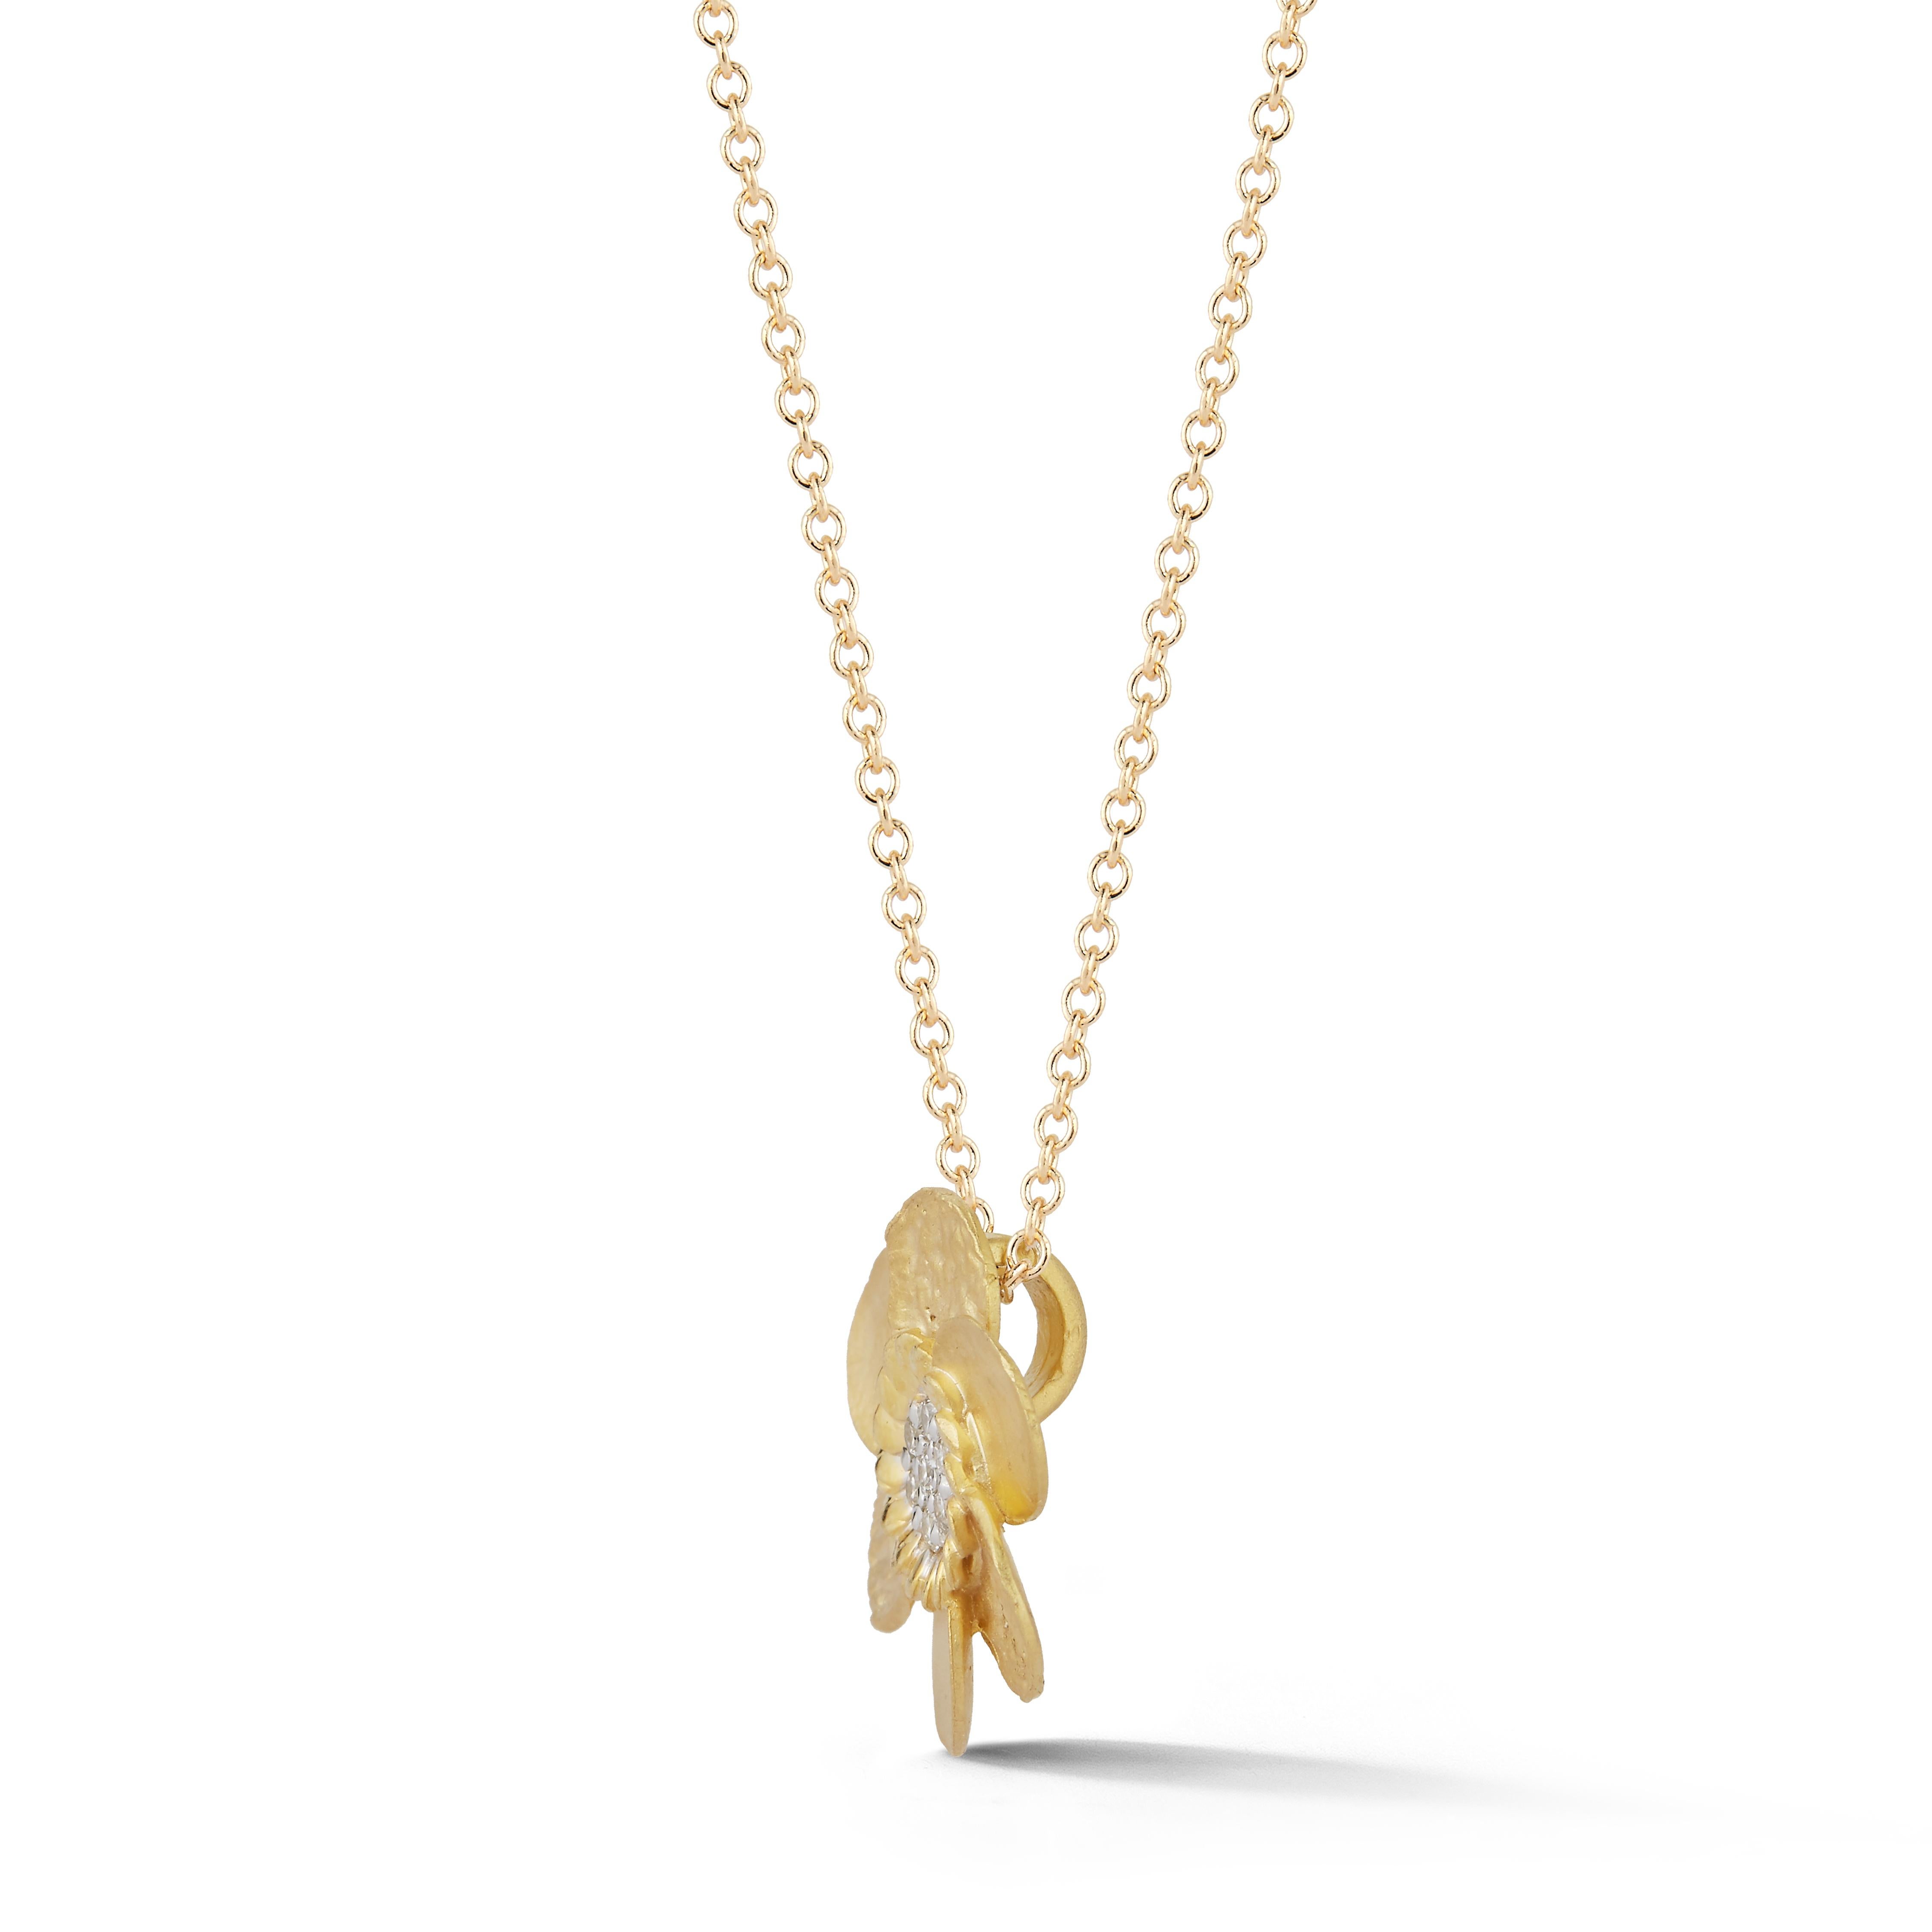 14 Karat Yellow Gold Hand-Crafted Mix Matte, Hammer, and Polish-Finished Daisy Pendant, Centered with 0.07 Carats of Pave Set Diamonds, Sliding on a 16